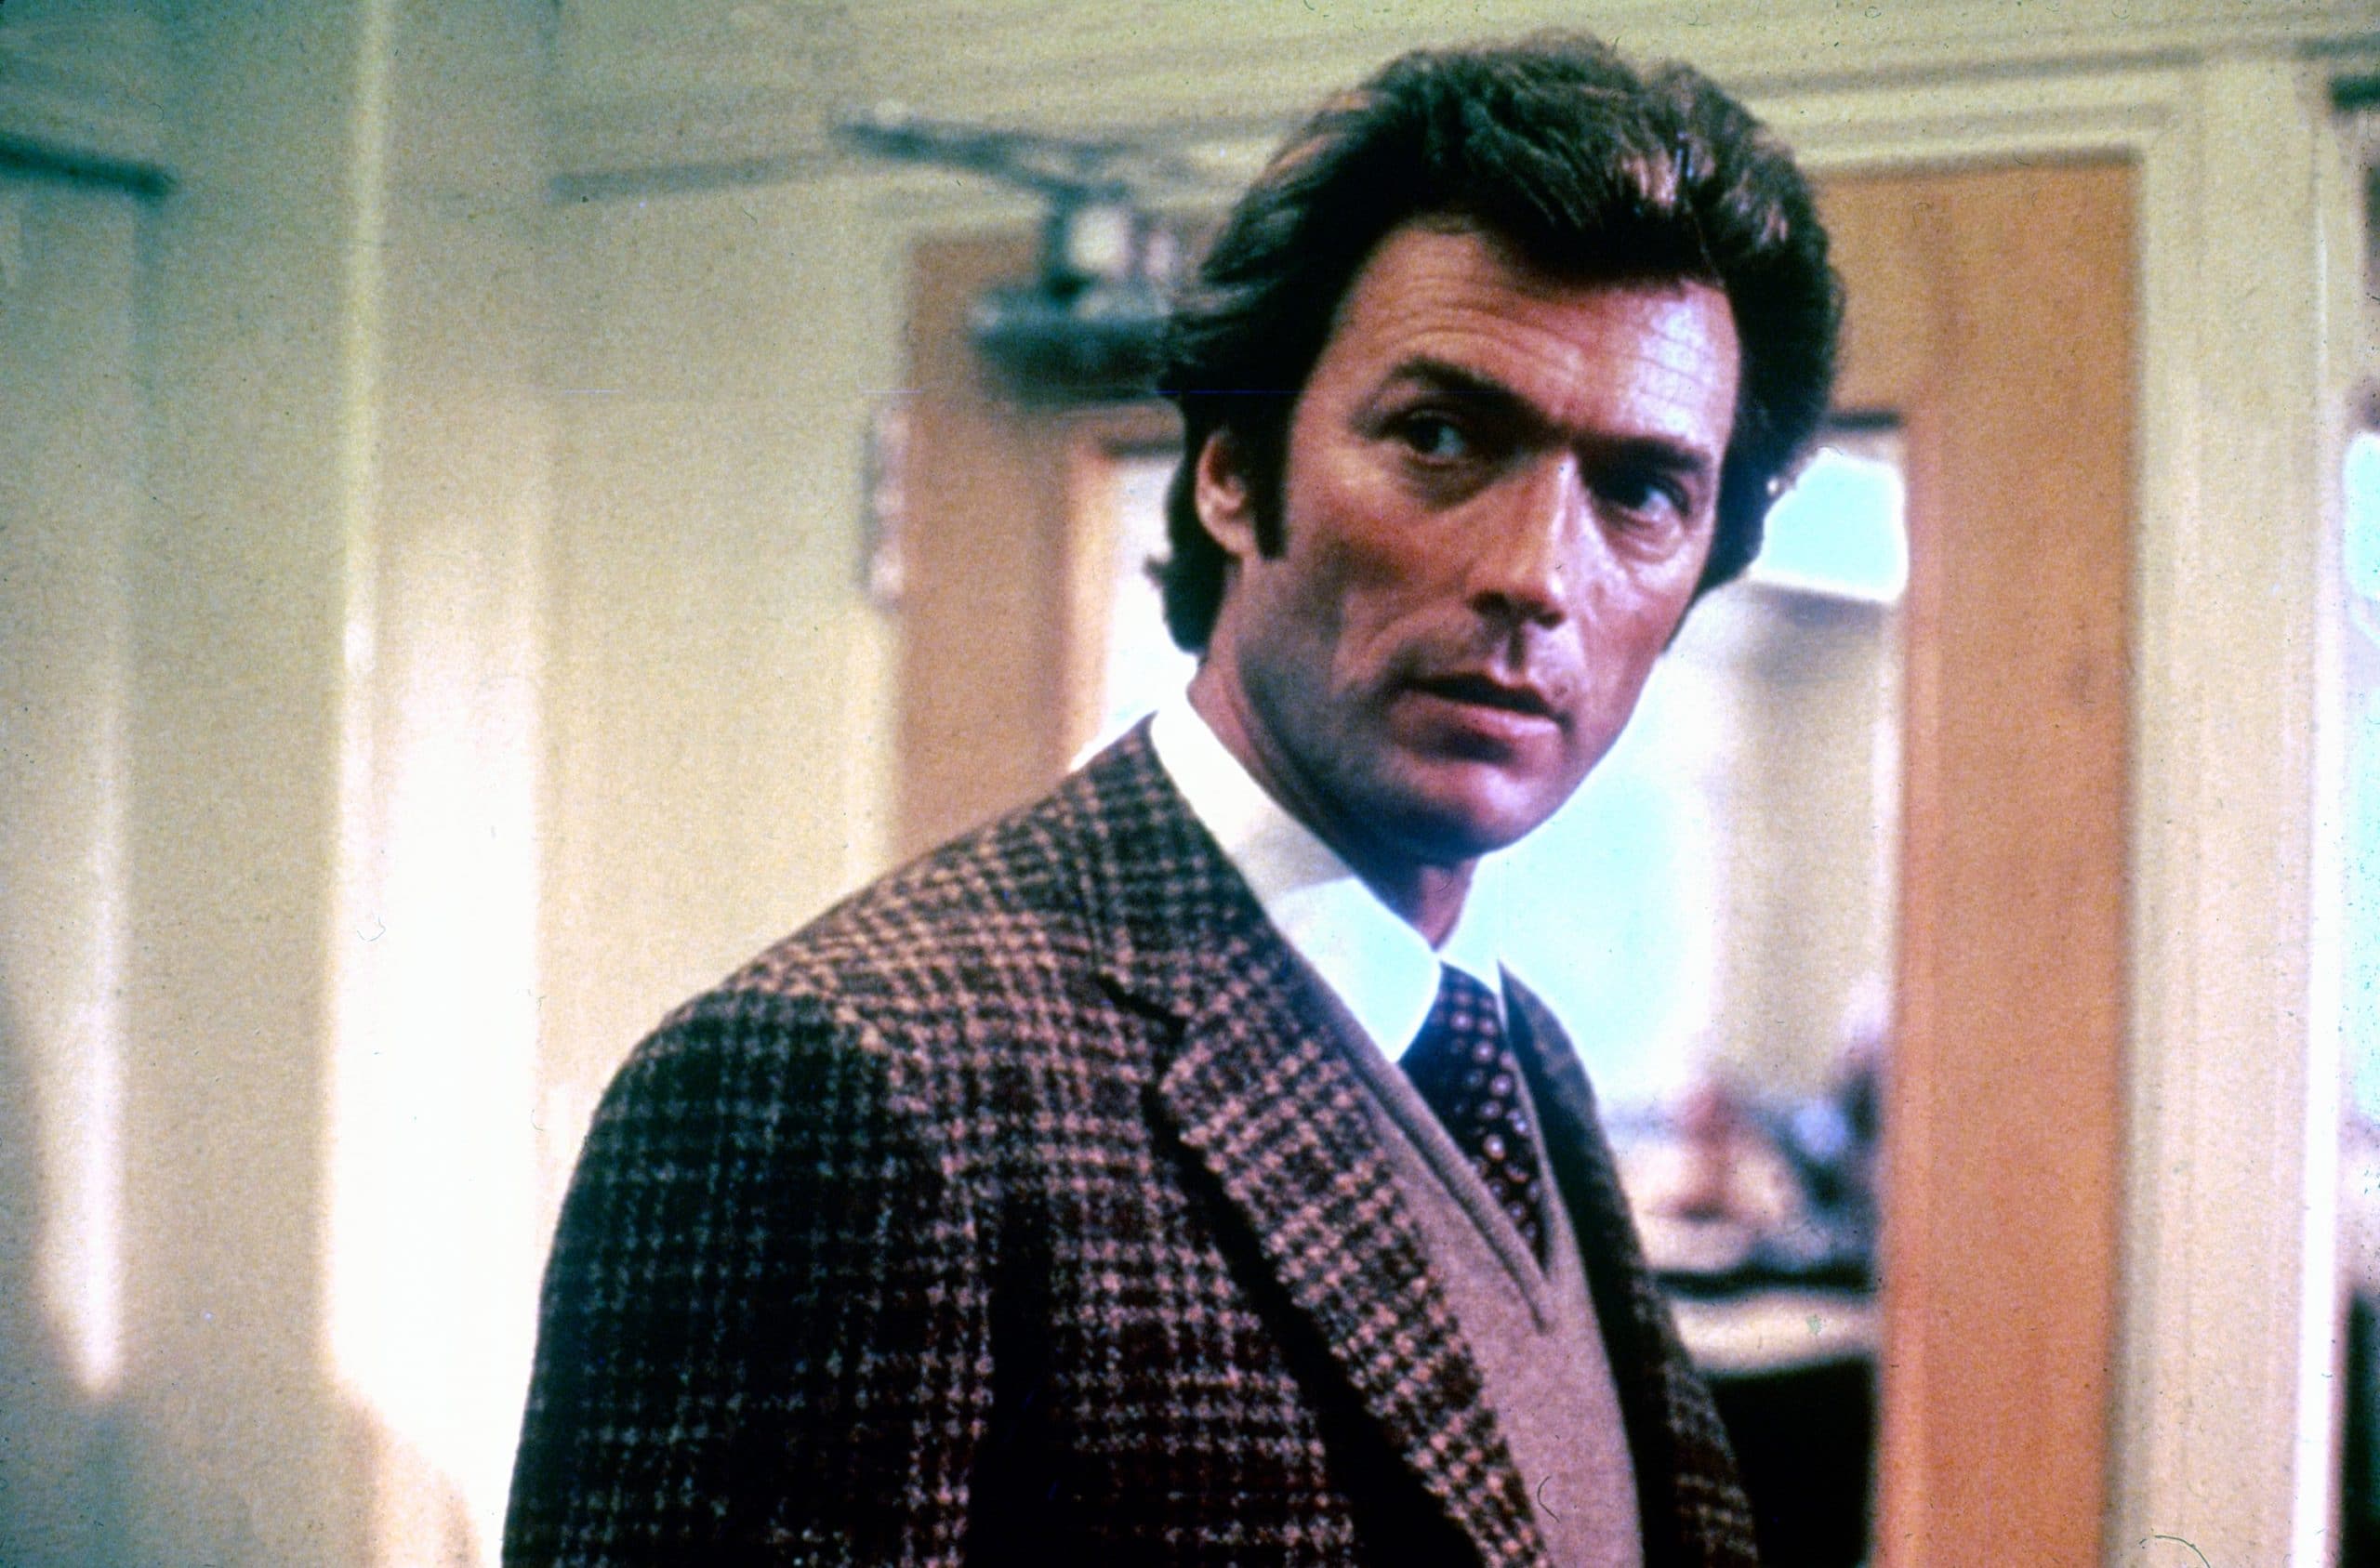 DIRTY HARRY, Clint Eastwood, 1971